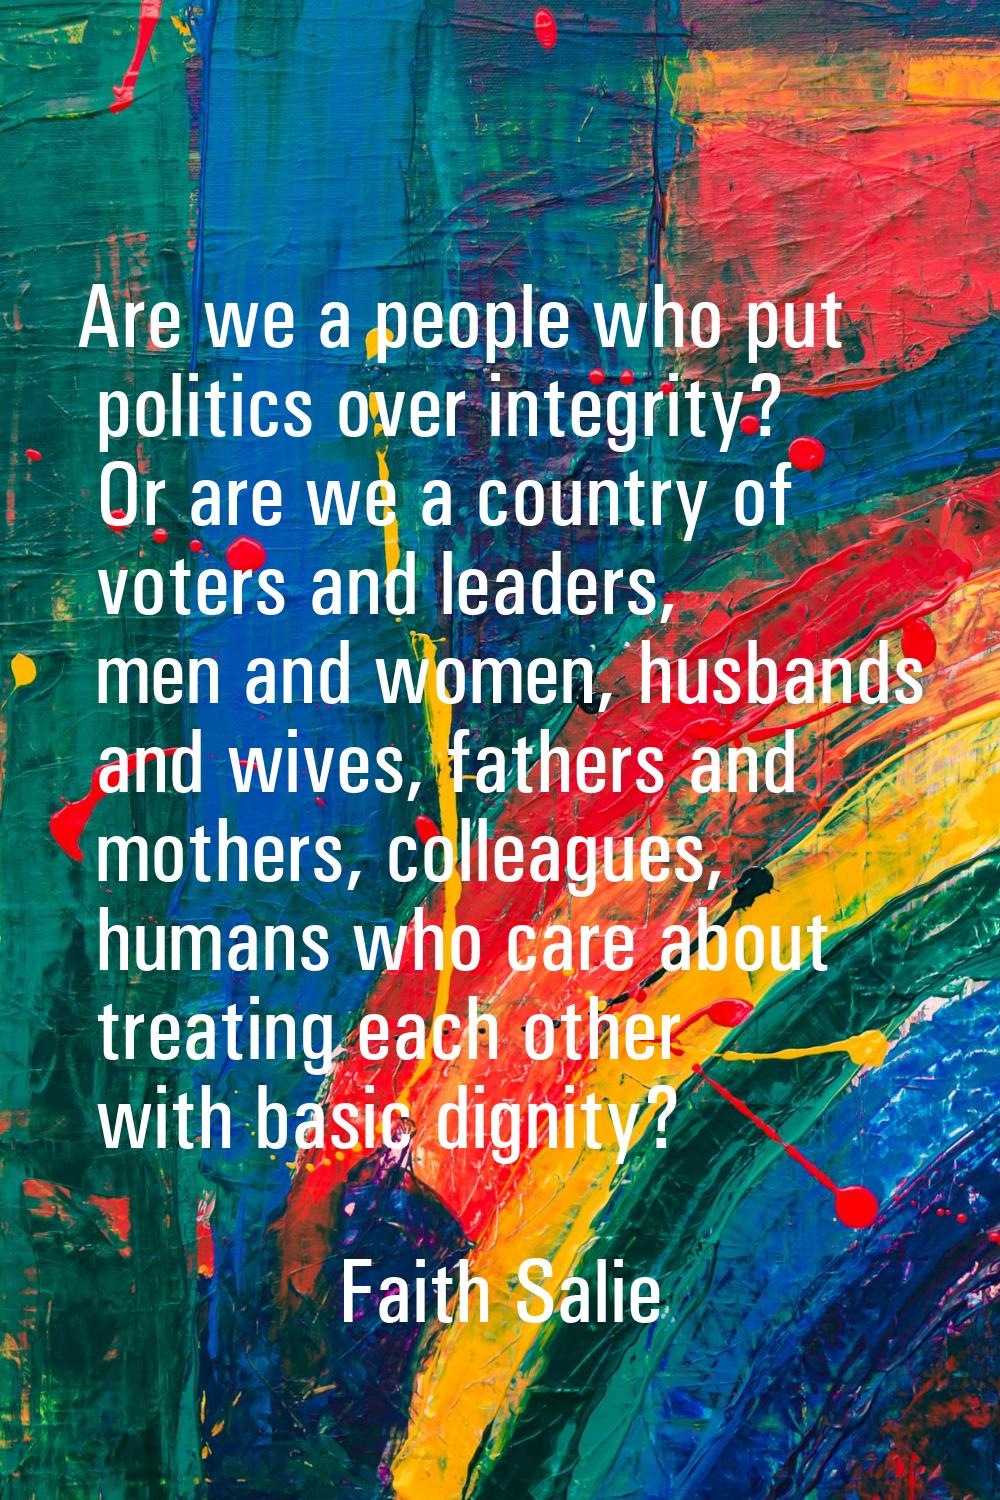 Are we a people who put politics over integrity? Or are we a country of voters and leaders, men and